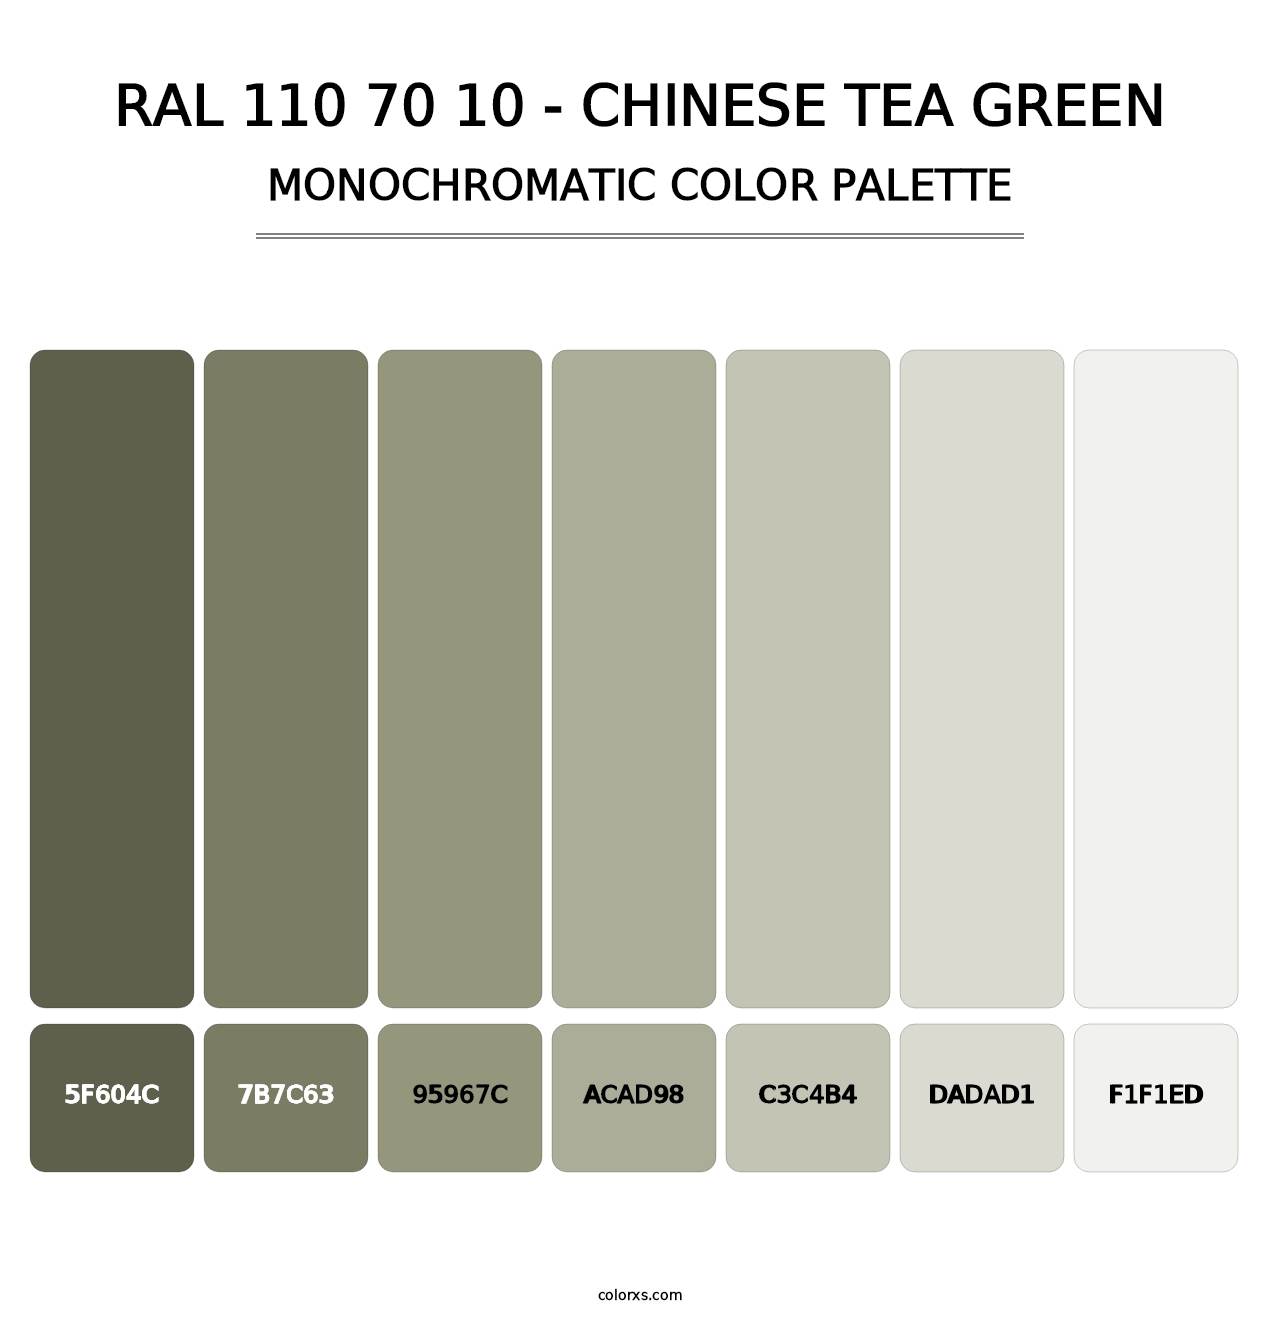 RAL 110 70 10 - Chinese Tea Green - Monochromatic Color Palette